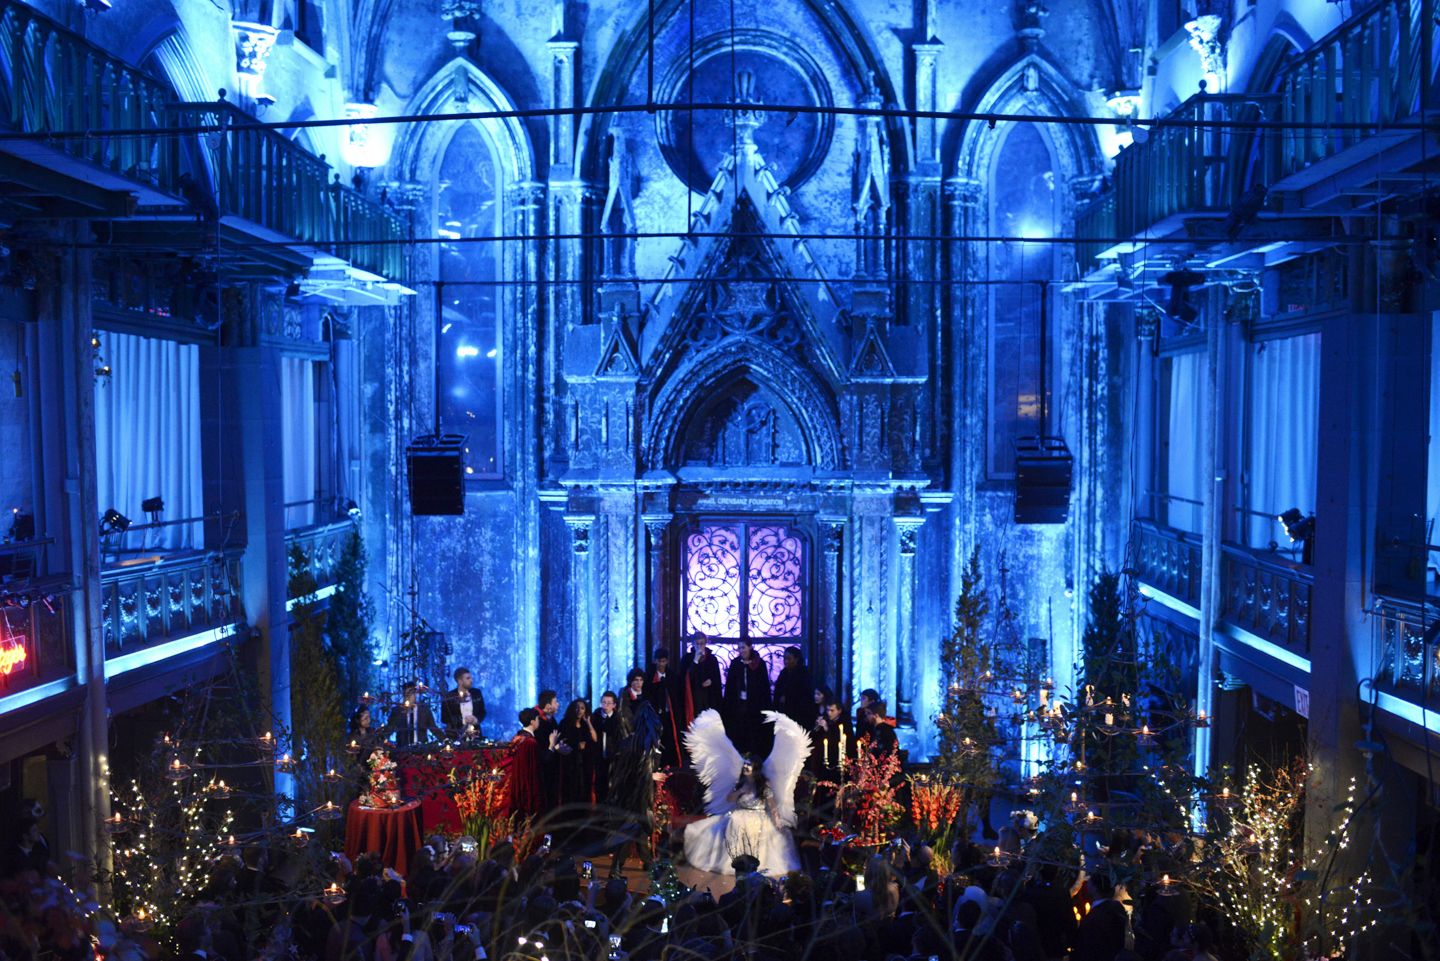 Blue, Light, Lighting, Architecture, Event, Stage, Performance, Crowd, Electric blue, Church, 